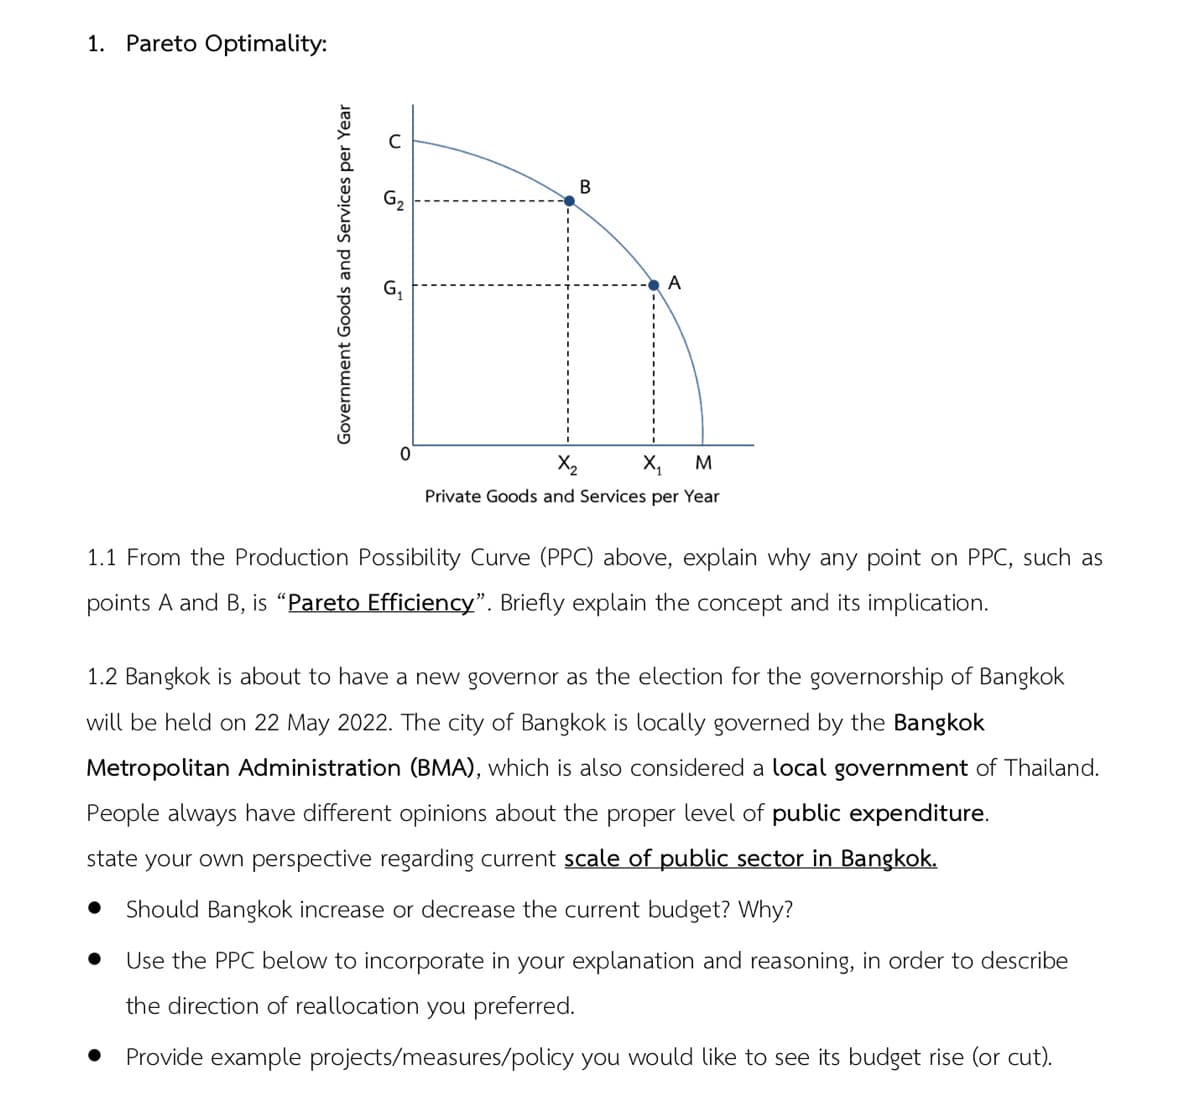 1. Pareto Optimality:
В
A
X2
X,
M
Private Goods and Services per Year
1.1 From the Production Possibility Curve (PPC) above, explain why any point on PPC, such as
points A and B, is “Pareto Efficiency". Briefly explain the concept and its implication.
1.2 Bangkok is about to have a new governor as the election for the governorship of Bangkok
will be held on 22 May 2022. The city of Bangkok is locally governed by the Bangkok
Metropolitan Administration (BMA), which is also considered a local government of Thailand.
People always have different opinions about the proper level of public expenditure.
state your own perspective regarding current scale of public sector in Bangkok.
Should Bangkok increase or decrease the current budget? Why?
Use the PPC below to incorporate in your explanation and reasoning, in order to describe
the direction of reallocation you preferred.
Provide example projects/measures/policy you would like to see its budget rise (or cut).
Government Goods and Services per Year
